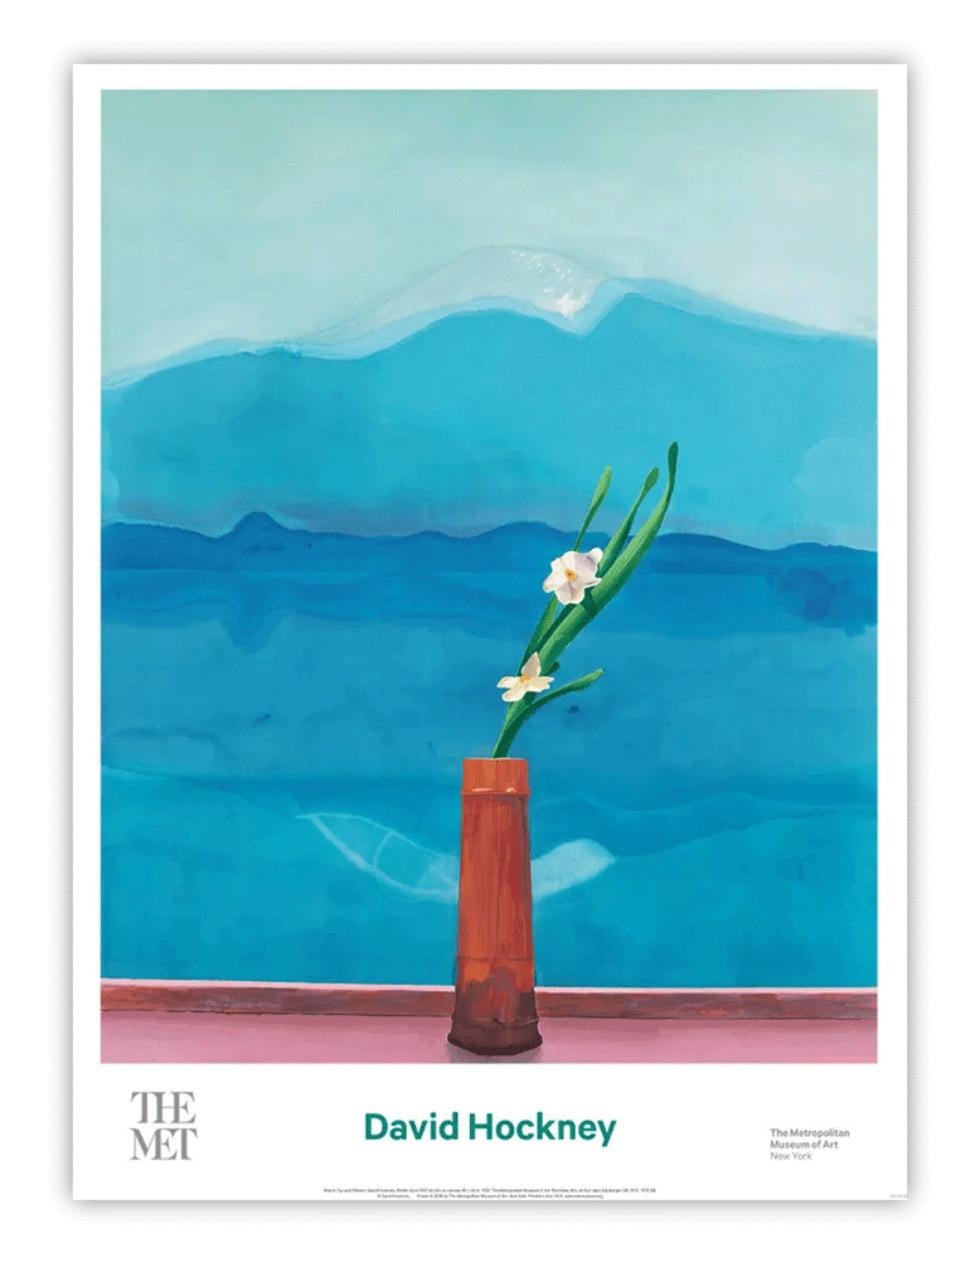 David Hockney, Mount Fuji and Flowers, 2016

Offset lithograph

63.5 x 86.5 cm

Original poster produced by the MET featuring Hockney’s 1972 Mount Fuji and Flowers painting

Certificate of Authenticity issued by gallery